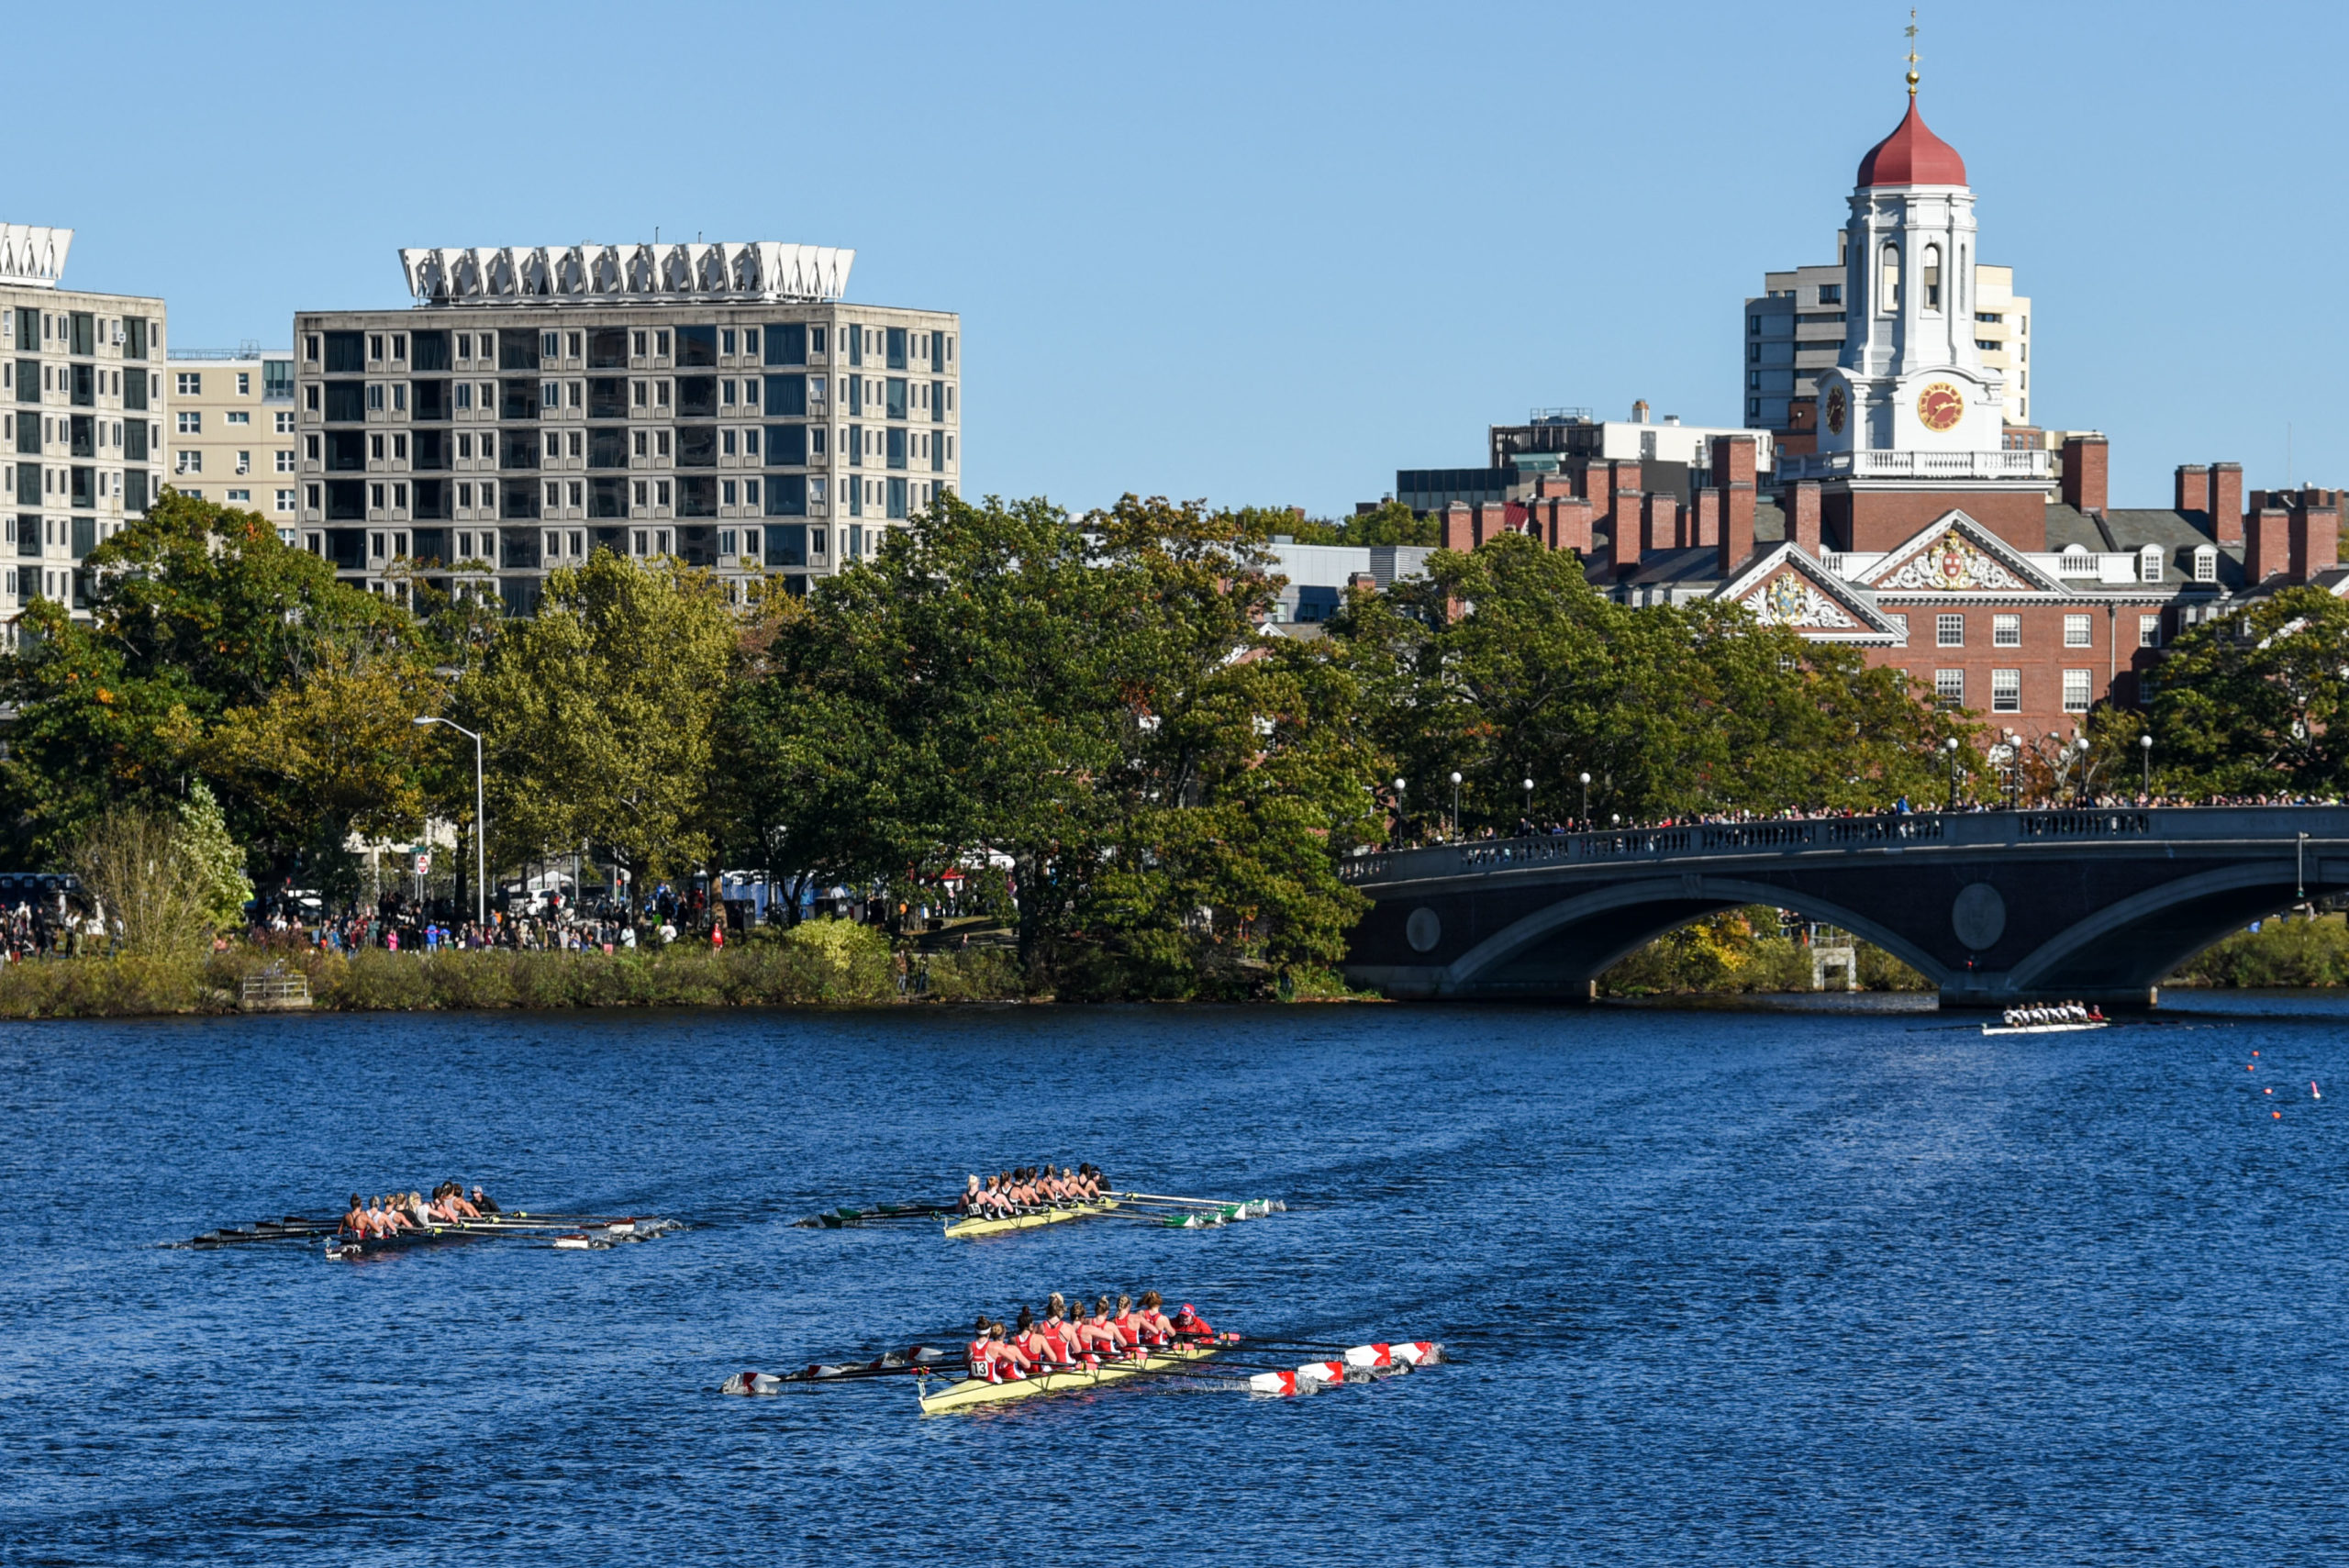 Freshmen Shine With 1stPlace Finish for Women’s Rowing at Head of the